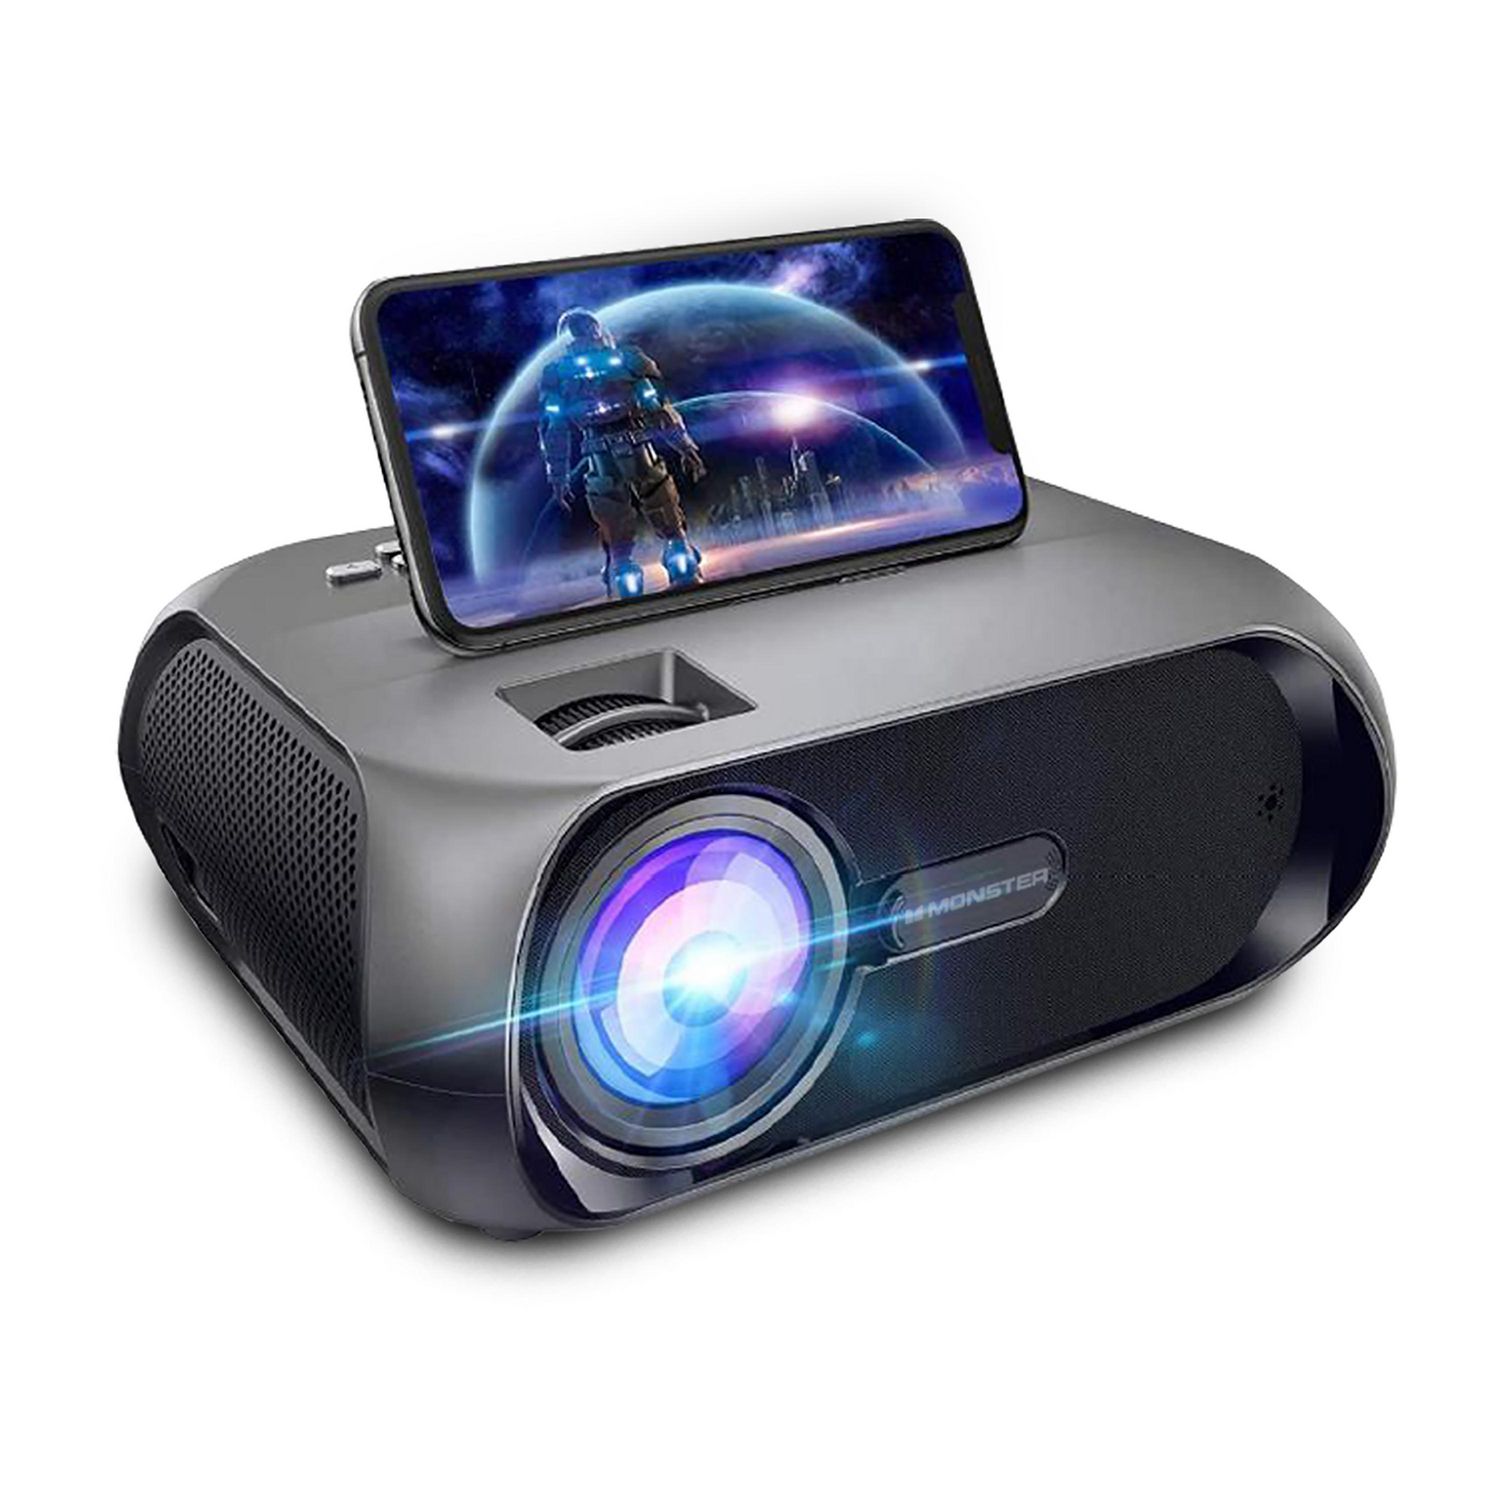 Monster Image Stream Wireless Super Bright 1080P FHD TFT LCD Projector Kit  With Included 120-Inch Screen and Travel Case MHV1-1052-CAN, 1080 FHD LCD 